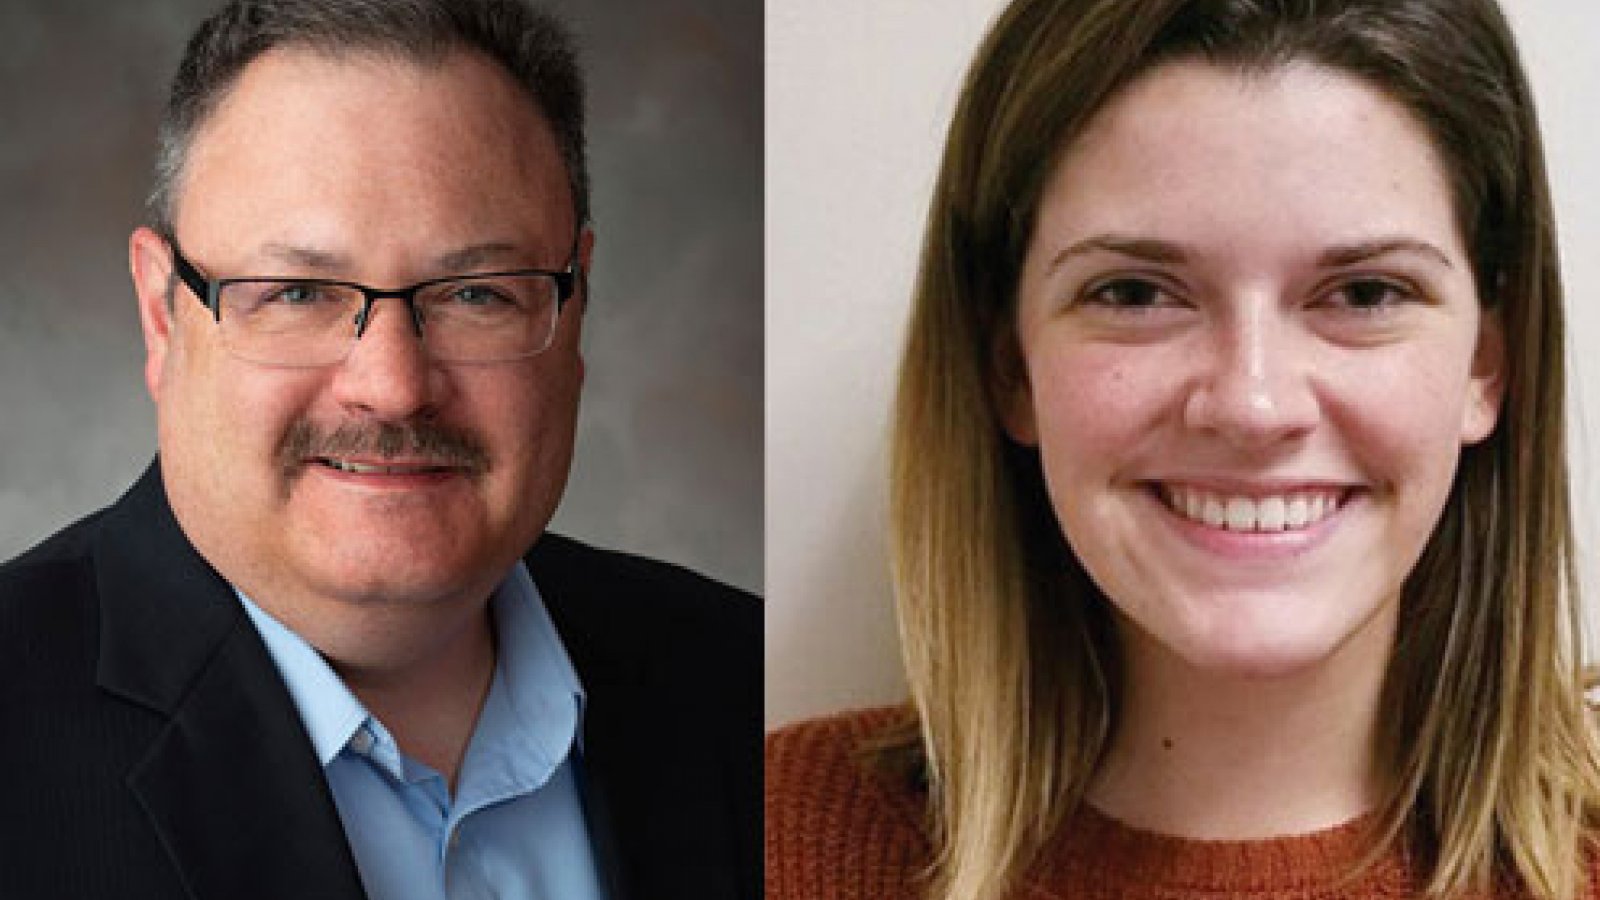 The latest episode of The Complete Engineering Podcast features Bob Williams and Brittlin Hoge, and examines how the Nebraska Industrial Assessment Center is positively impacting area businesses and engineering students.